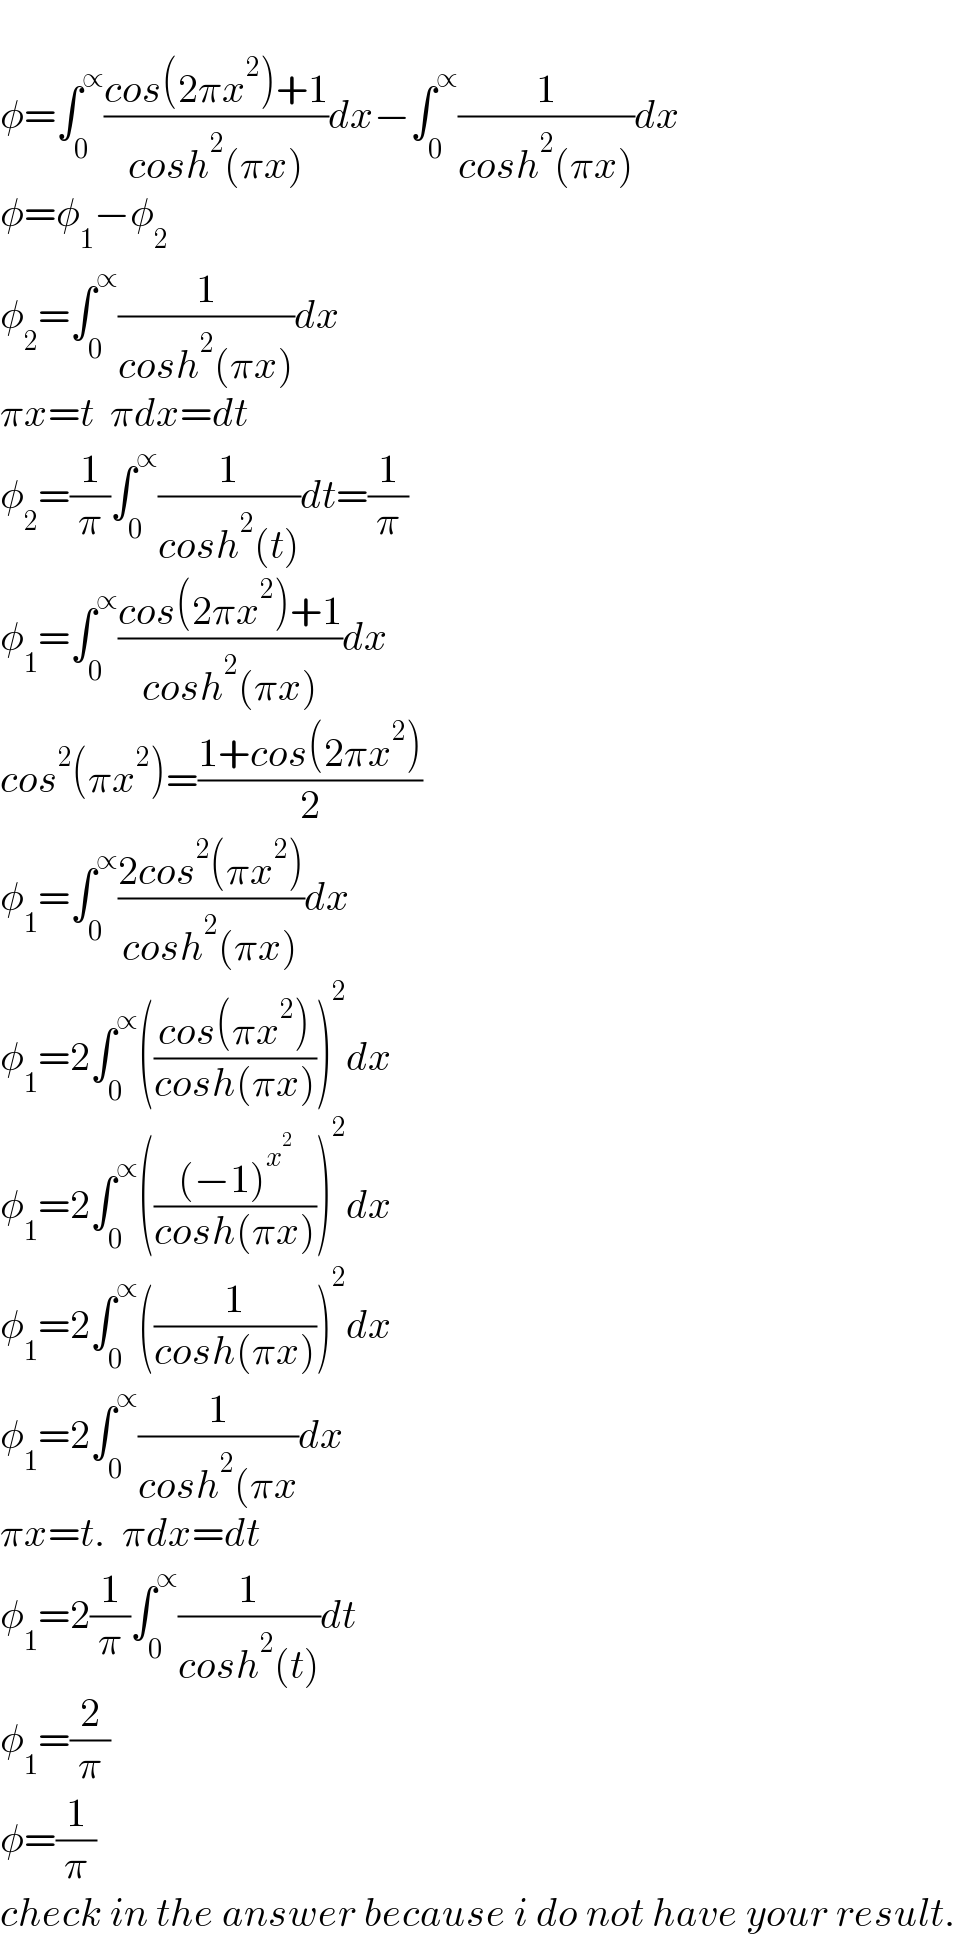   φ=∫_0 ^∝ ((cos(2πx^2 )+1)/(cosh^2 (πx)))dx−∫_0 ^∝ (1/(cosh^2 (πx)))dx  φ=φ_1 −φ_2   φ_2 =∫_0 ^∝ (1/(cosh^2 (πx)))dx    πx=t  πdx=dt  φ_2 =(1/π)∫_0 ^∝ (1/(cosh^2 (t)))dt=(1/π)  φ_1 =∫_0 ^∝ ((cos(2πx^2 )+1)/(cosh^2 (πx)))dx  cos^2 (πx^2 )=((1+cos(2πx^2 ))/2)  φ_1 =∫_0 ^∝ ((2cos^2 (πx^2 ))/(cosh^2 (πx)))dx  φ_1 =2∫_0 ^∝ (((cos(πx^2 ))/(cosh(πx))))^2 dx  φ_1 =2∫_0 ^∝ ((((−1)^x^2  )/(cosh(πx))))^2 dx  φ_1 =2∫_0 ^∝ ((1/(cosh(πx))))^2 dx  φ_1 =2∫_0 ^∝ (1/(cosh^2 (πx))dx  πx=t.  πdx=dt  φ_1 =2(1/π)∫_0 ^∝ (1/(cosh^2 (t)))dt  φ_1 =(2/π)  φ=(1/π)  check in the answer because i do not have your result.  